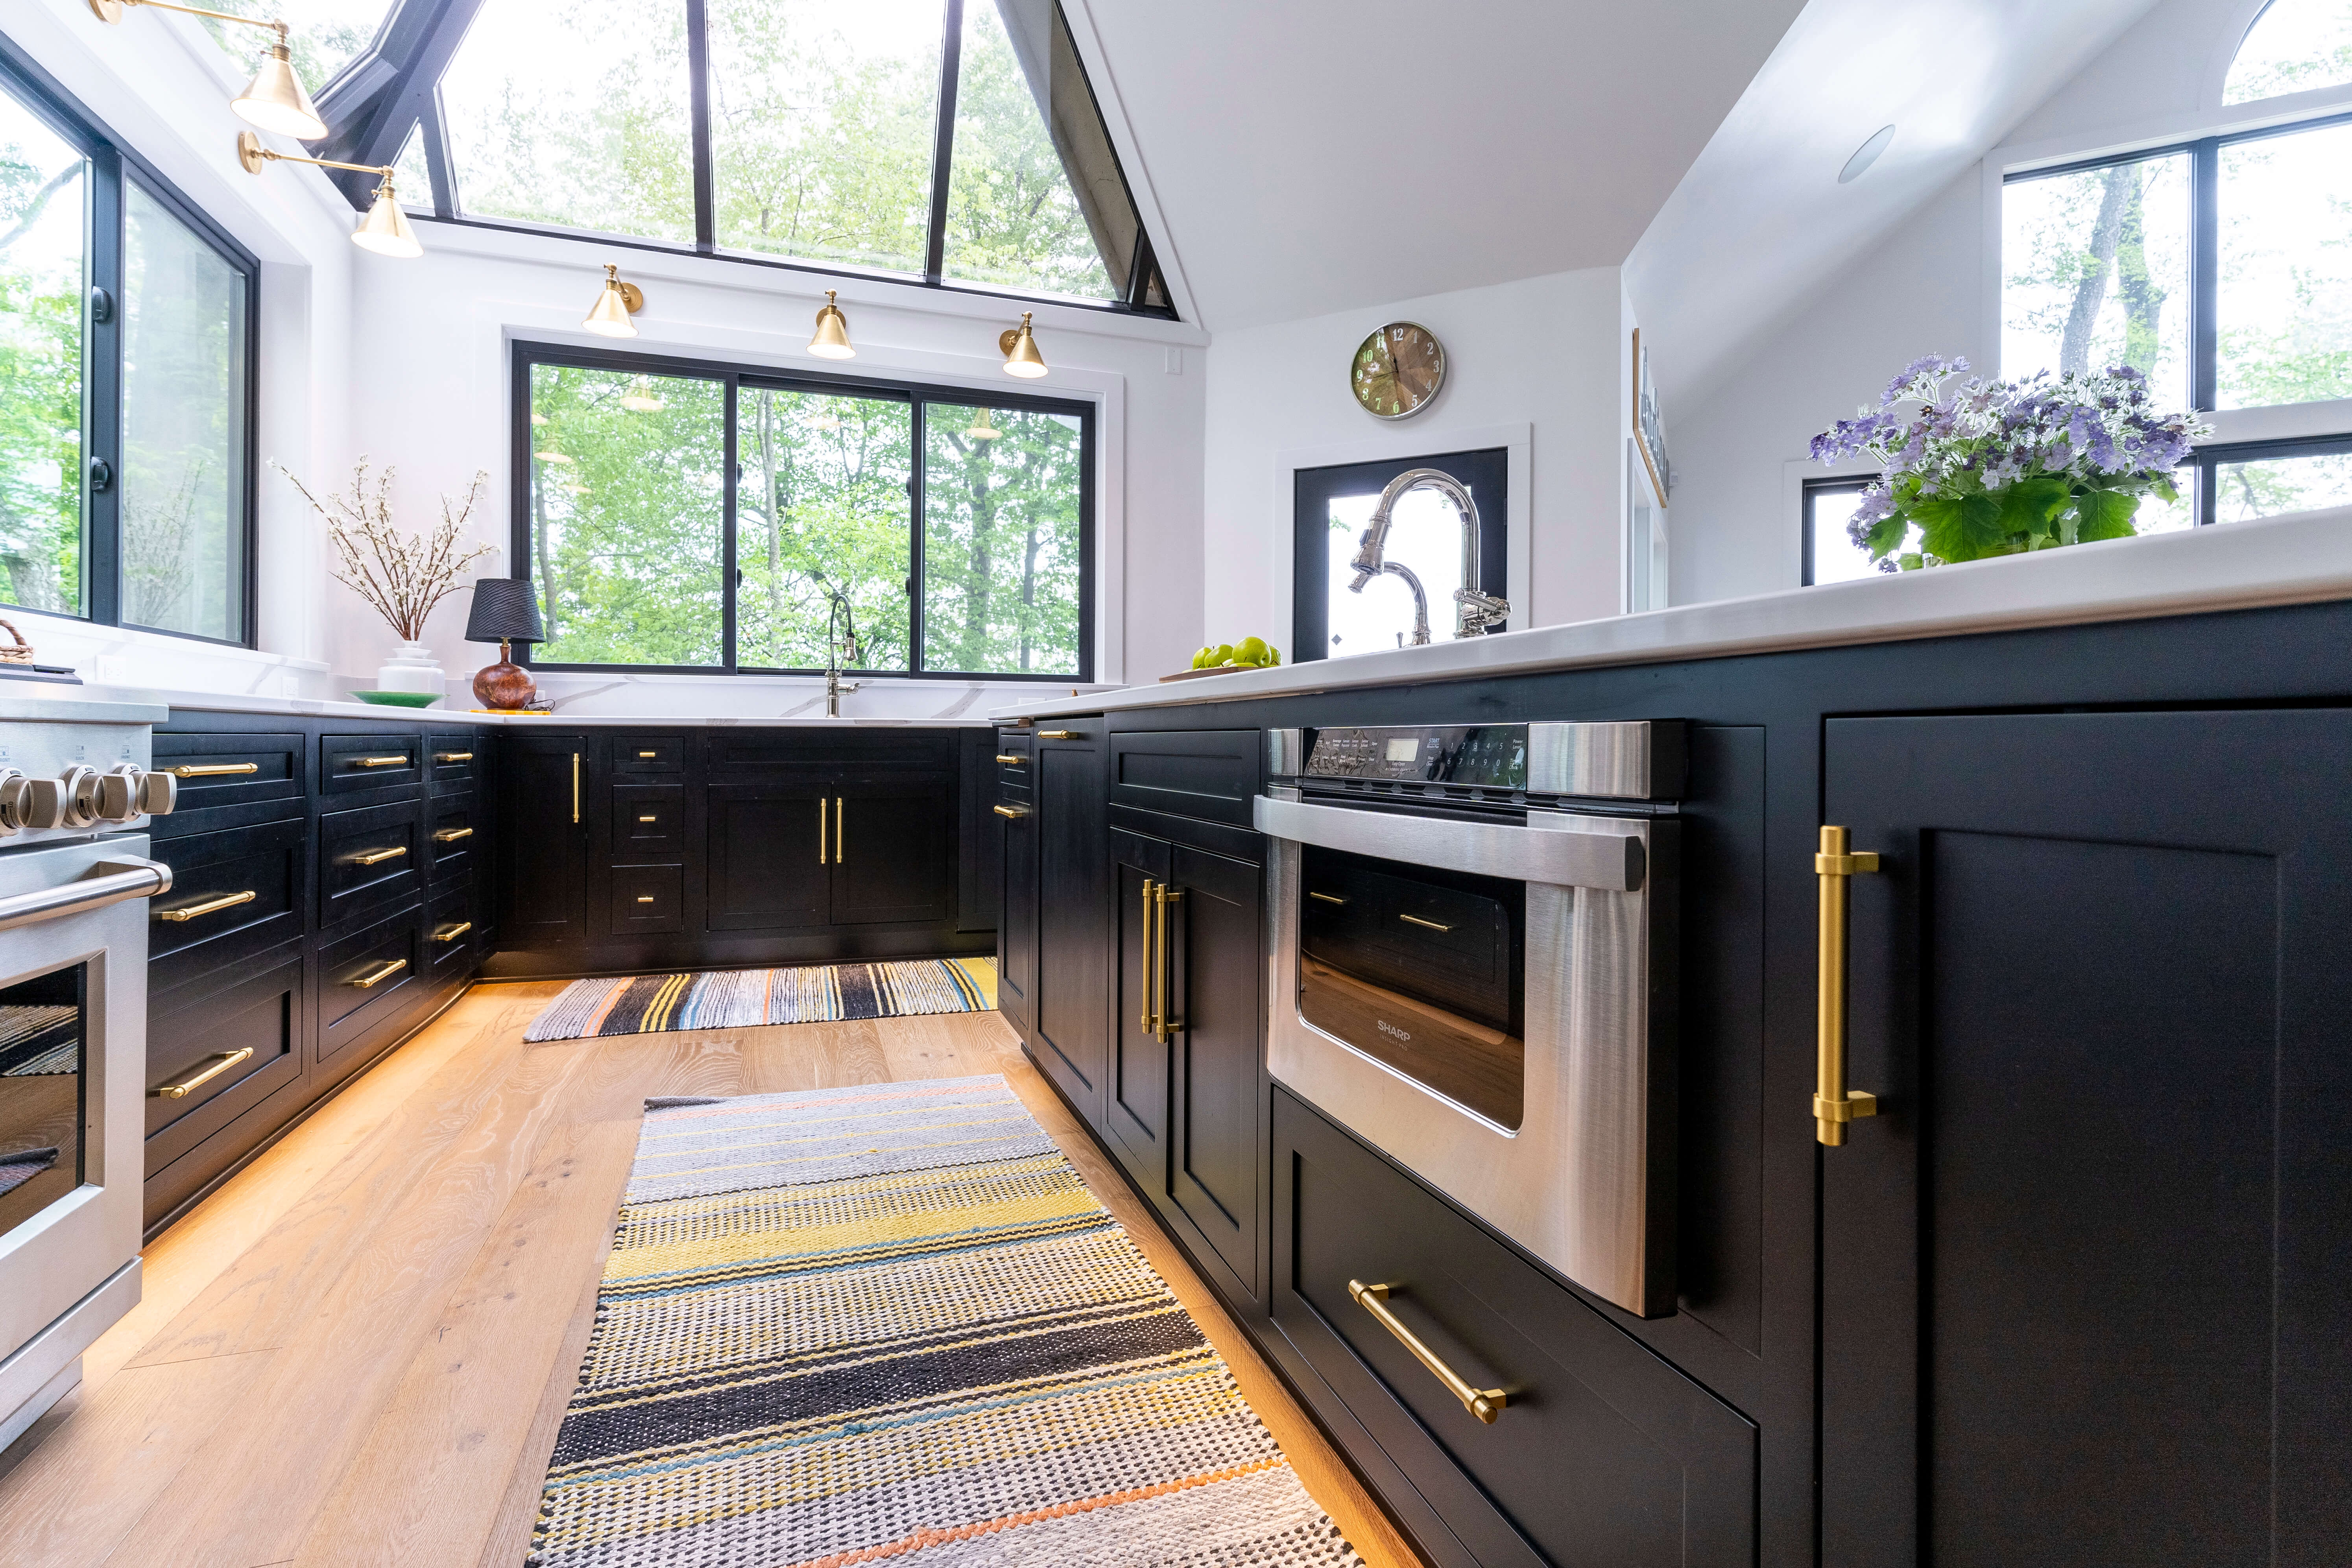 All black cabinets in a new home with vaulted ceilings, black framed windows, and bright white painted walls.